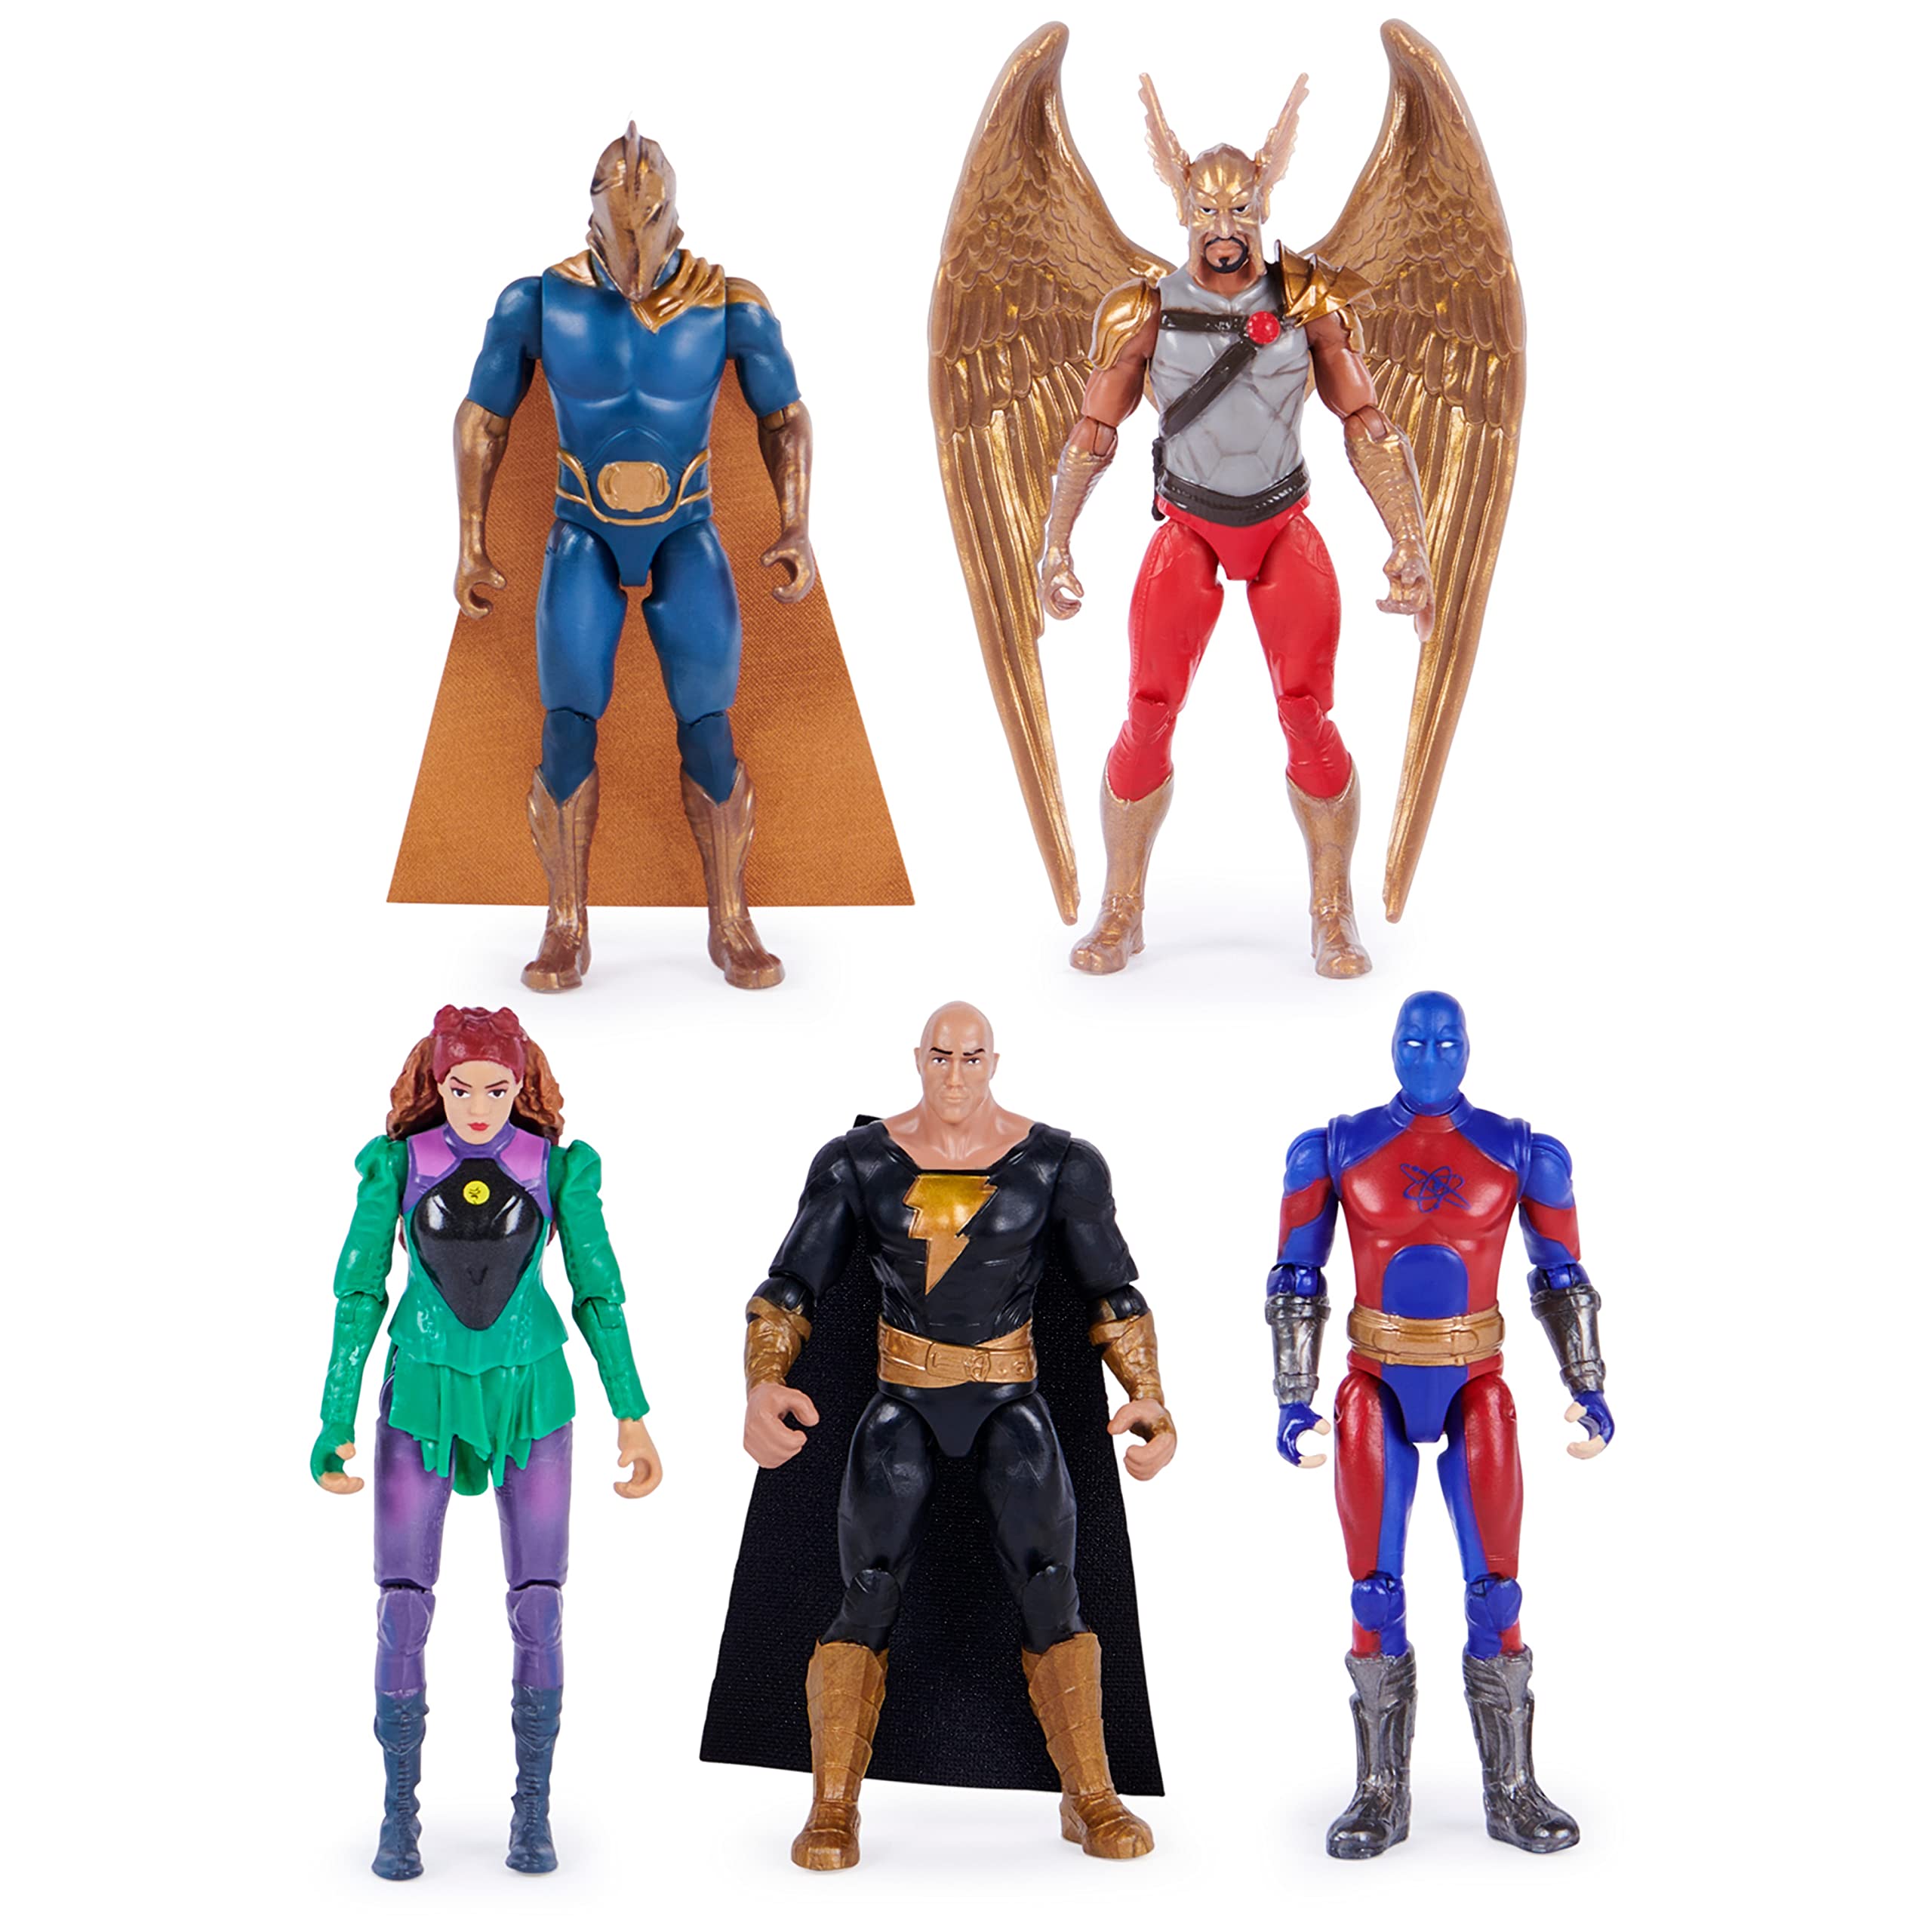 DC Comics, Black Adam and Justice Society Set, 4-inch Black Adam Toy Figures and Throne | Hawkman, Dr. Fate, Atom Smasher, Cyclone | Kids Toys for Boys and Girls Ages 3 and Up (Amazon Exclusive)